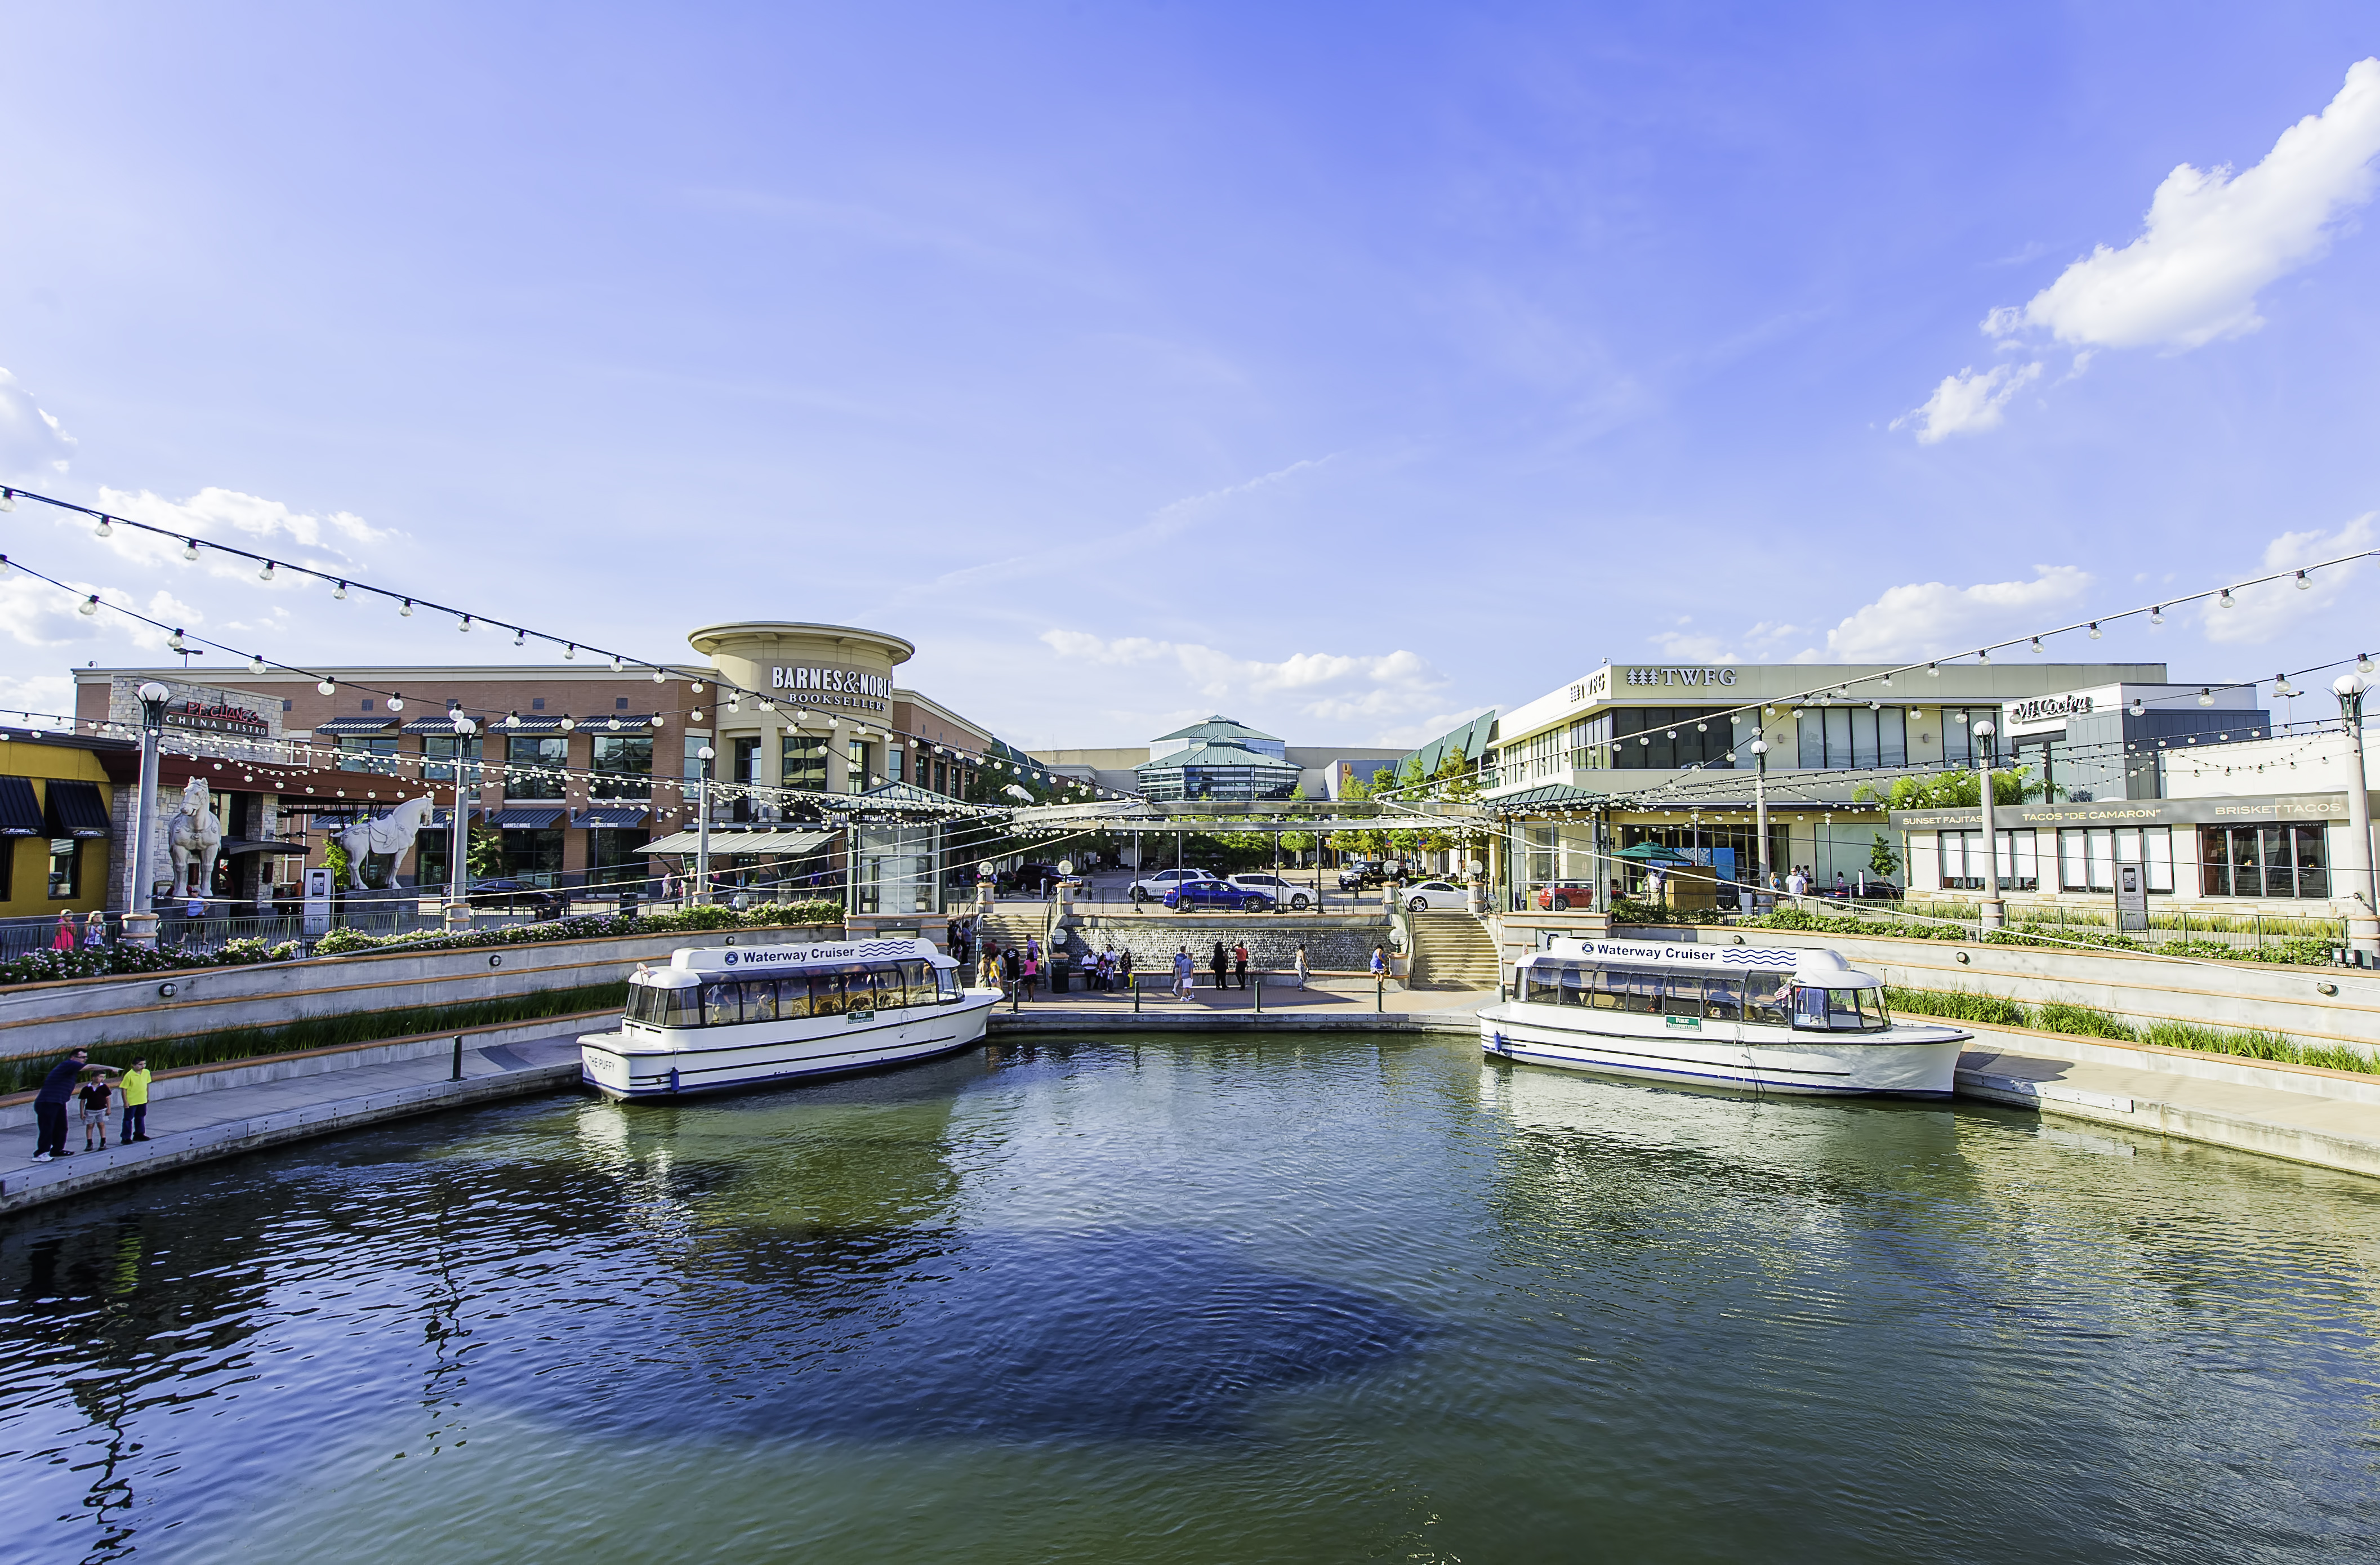 Waterway Cruisers at Woodlands Mall Turning Basin - The Woodlands Journal